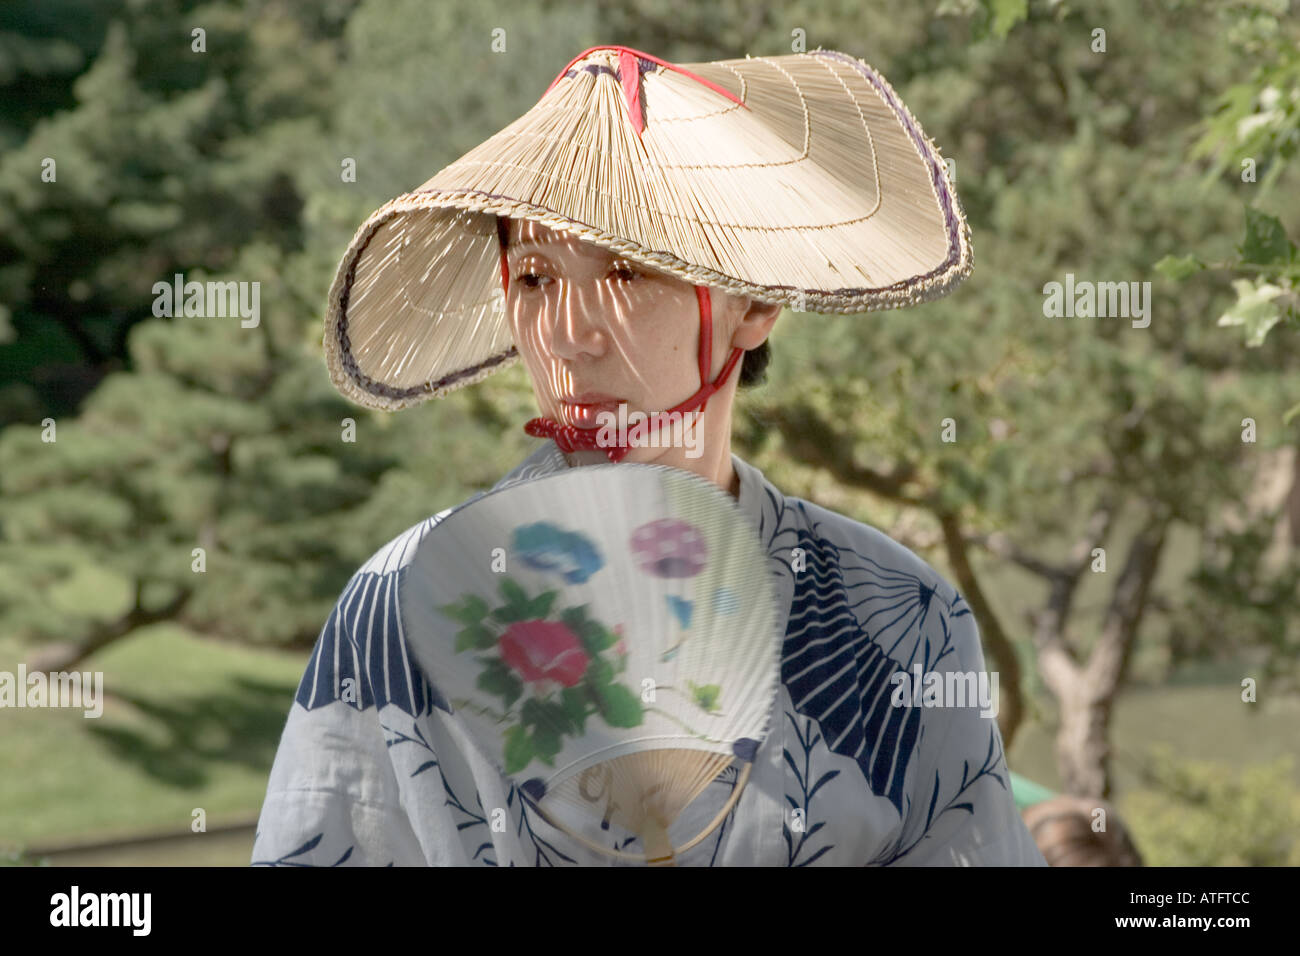 A Japanese woman in traditional dress with straw hat and fan at the annual Japanese Festival at the Missouri Botanical Garden in Stock Photo